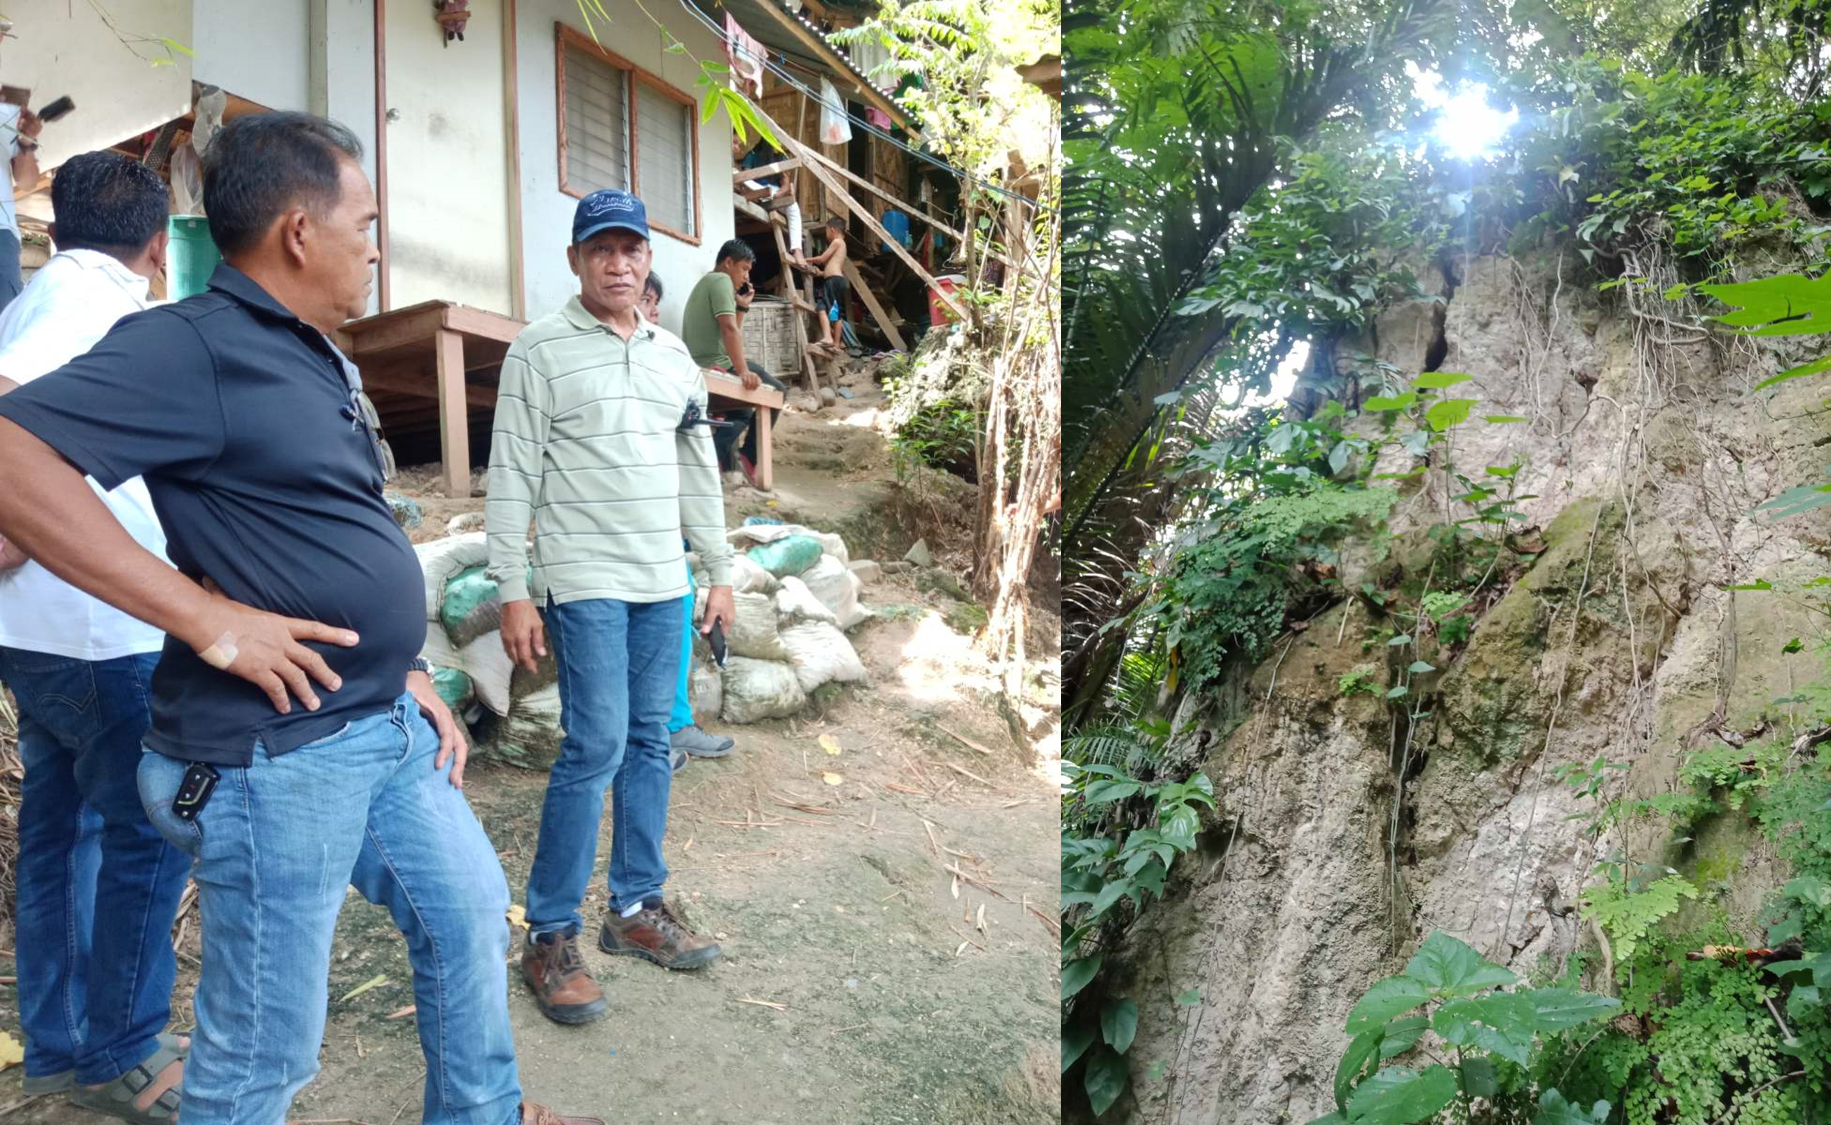 Ground assessment for possible landslide together with Brgy Council of Brgy. Maa, MGB XI, DENR and Davao City DRRMO with its head of office retired PCOL. Alfredo Baloran, Nov. 2, 2019.